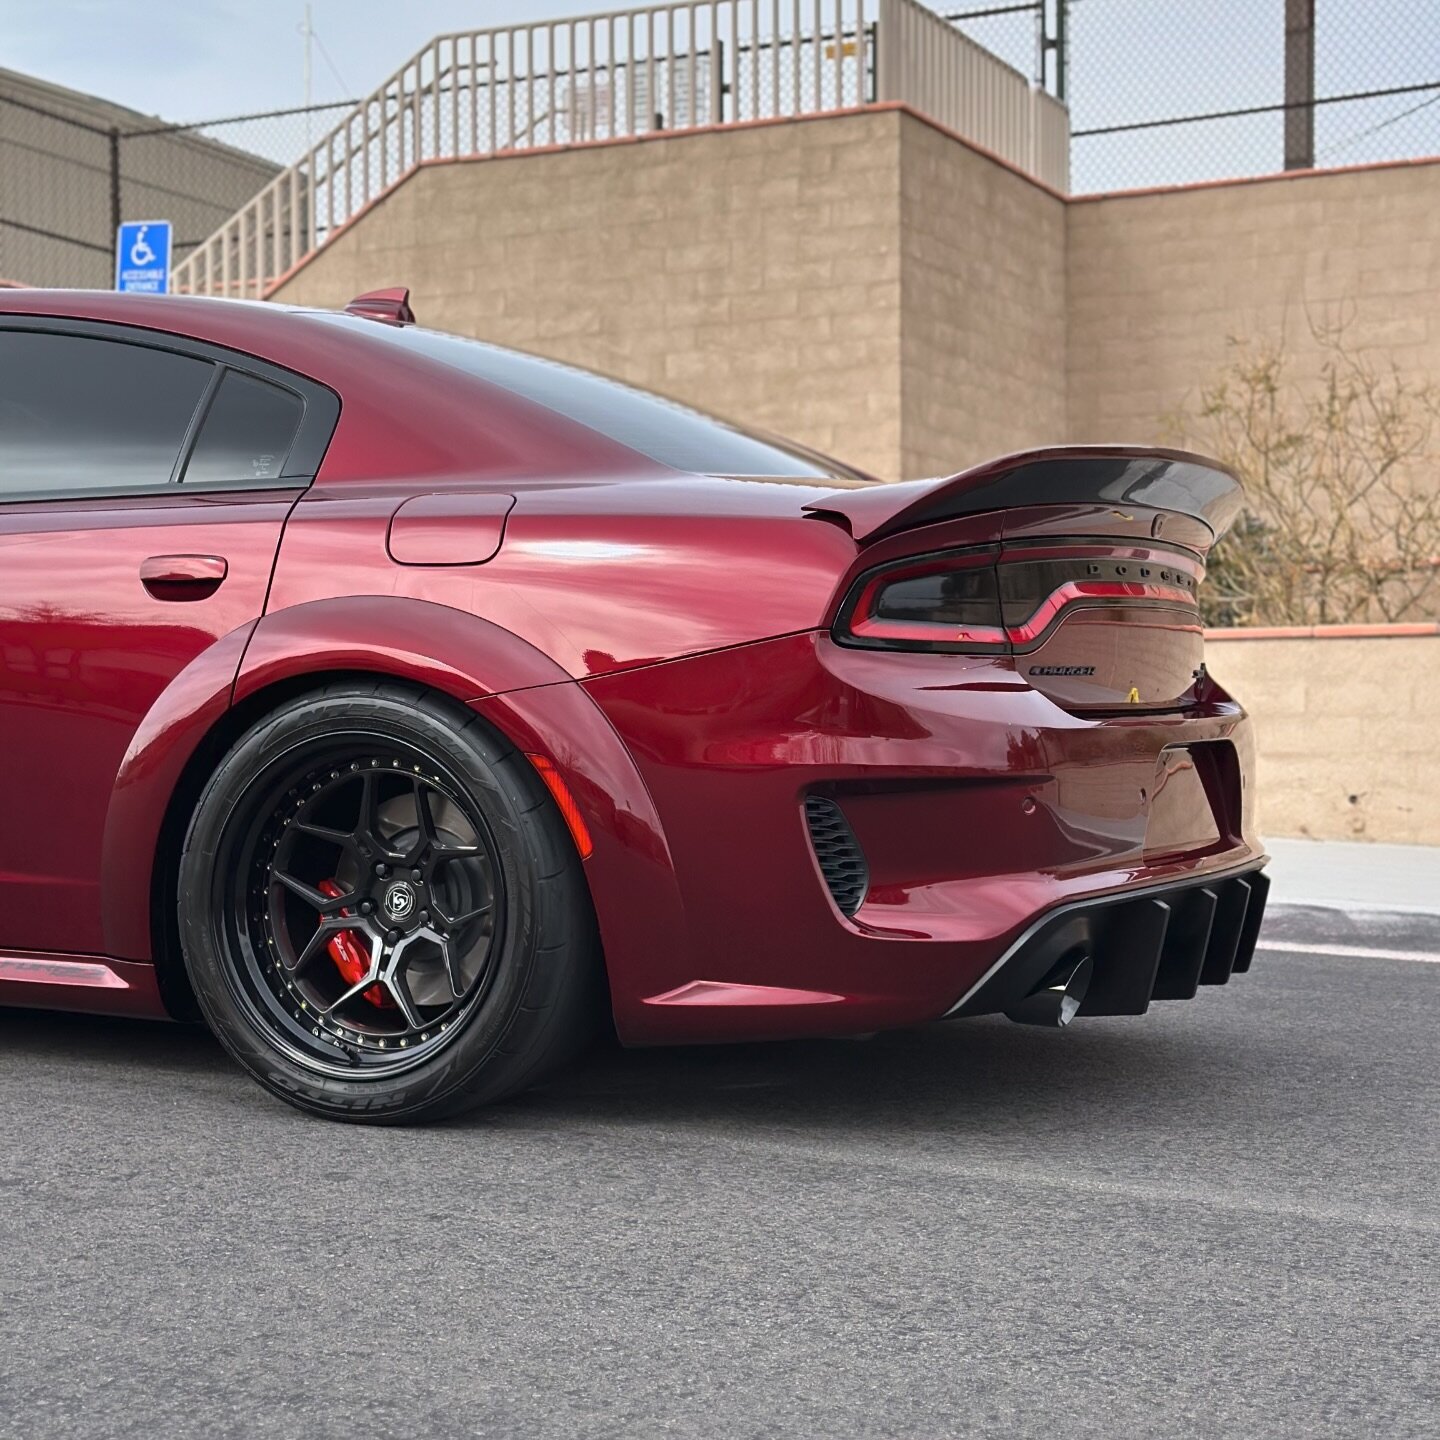 That 🍑 tho&hellip; #dodge #charger #hellcat